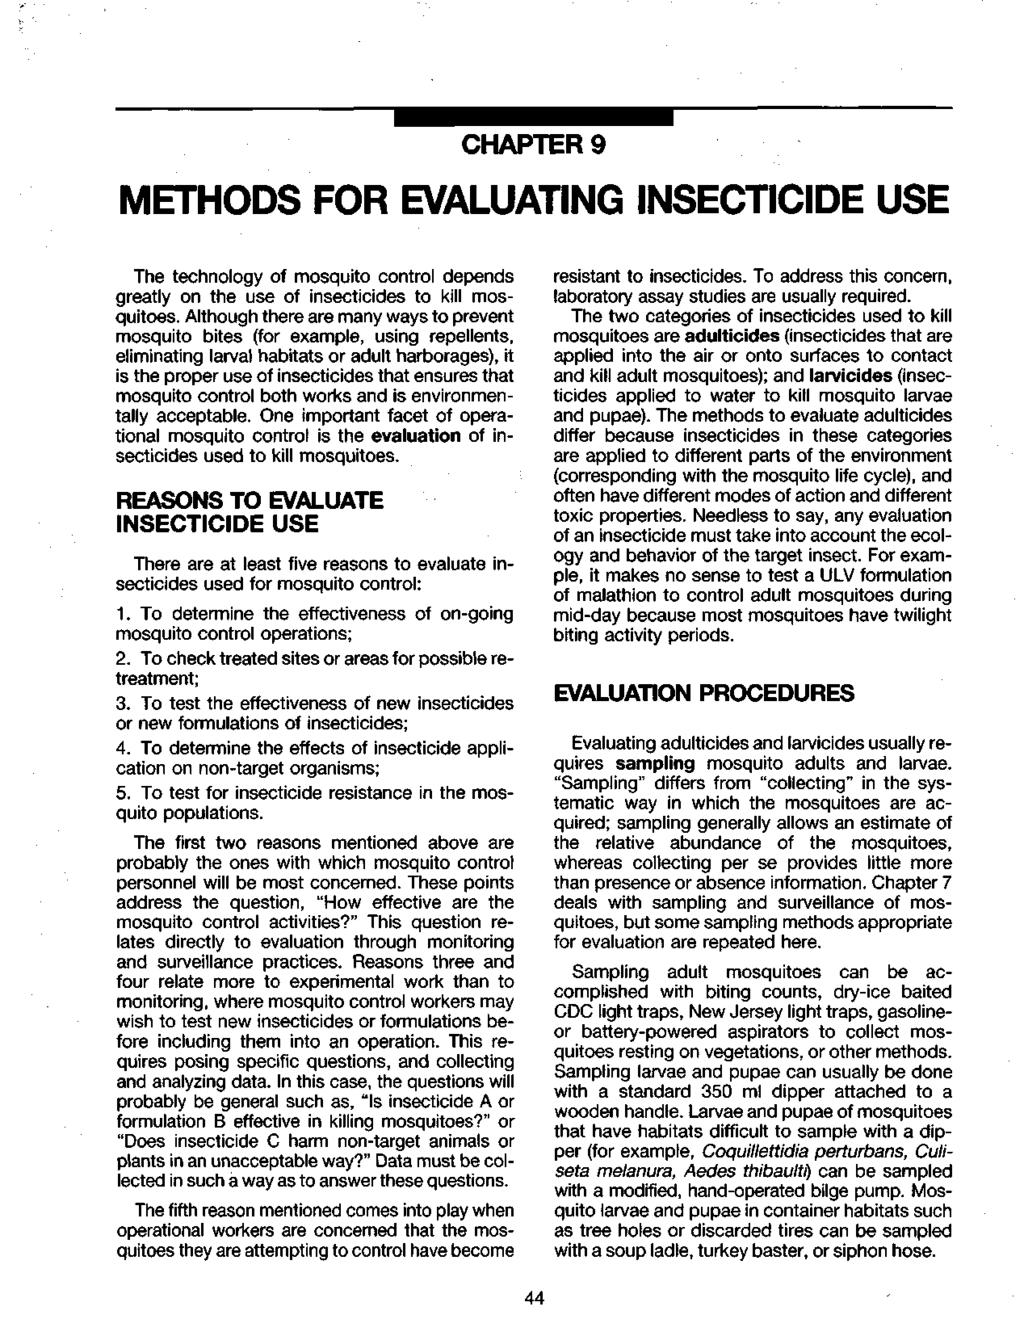 CHAPTER 9 METHODS FOR EVALUATING INSECTICIDE USE The technology of mosquito control depends greatly on the use of insecticides to kill mosquitoes.